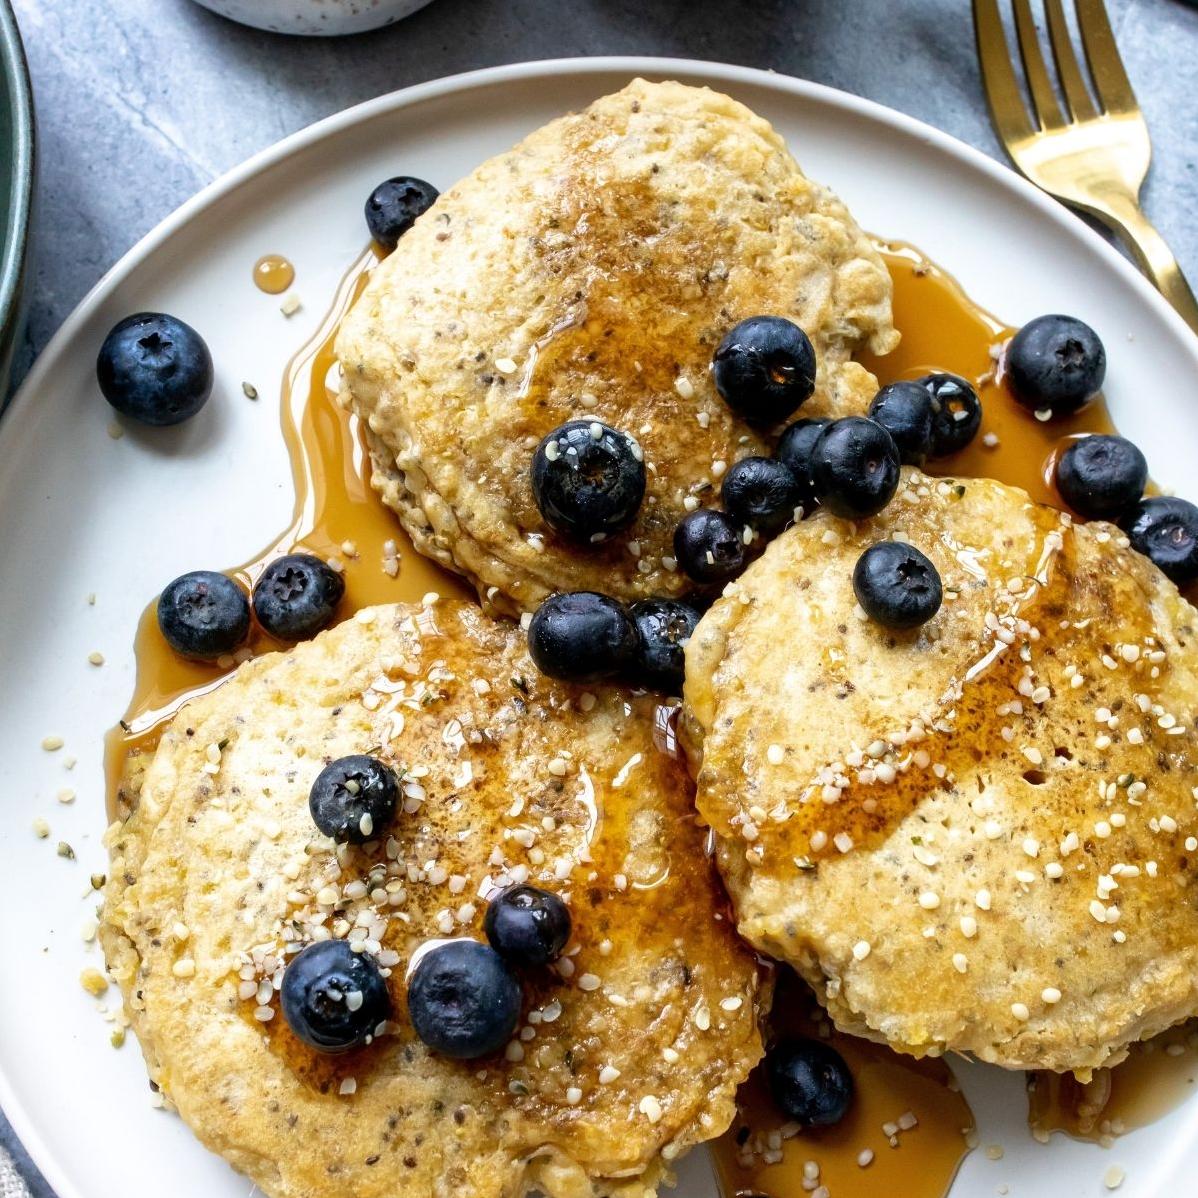  Pancakes that are both gluten-free and superfood-packed? Yes, please!